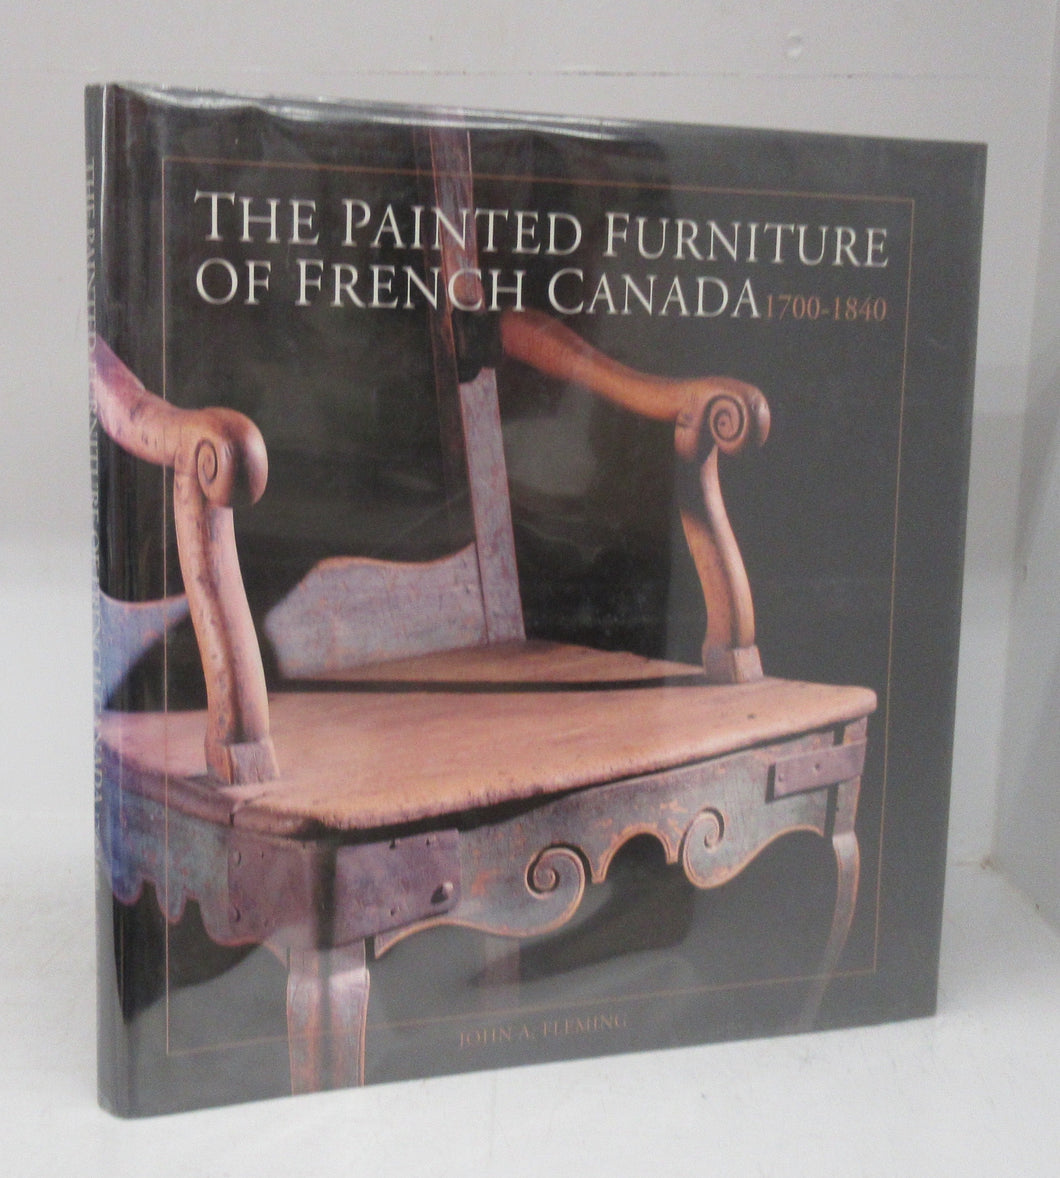 The  Painted Furniture of French Canada 1700-1840